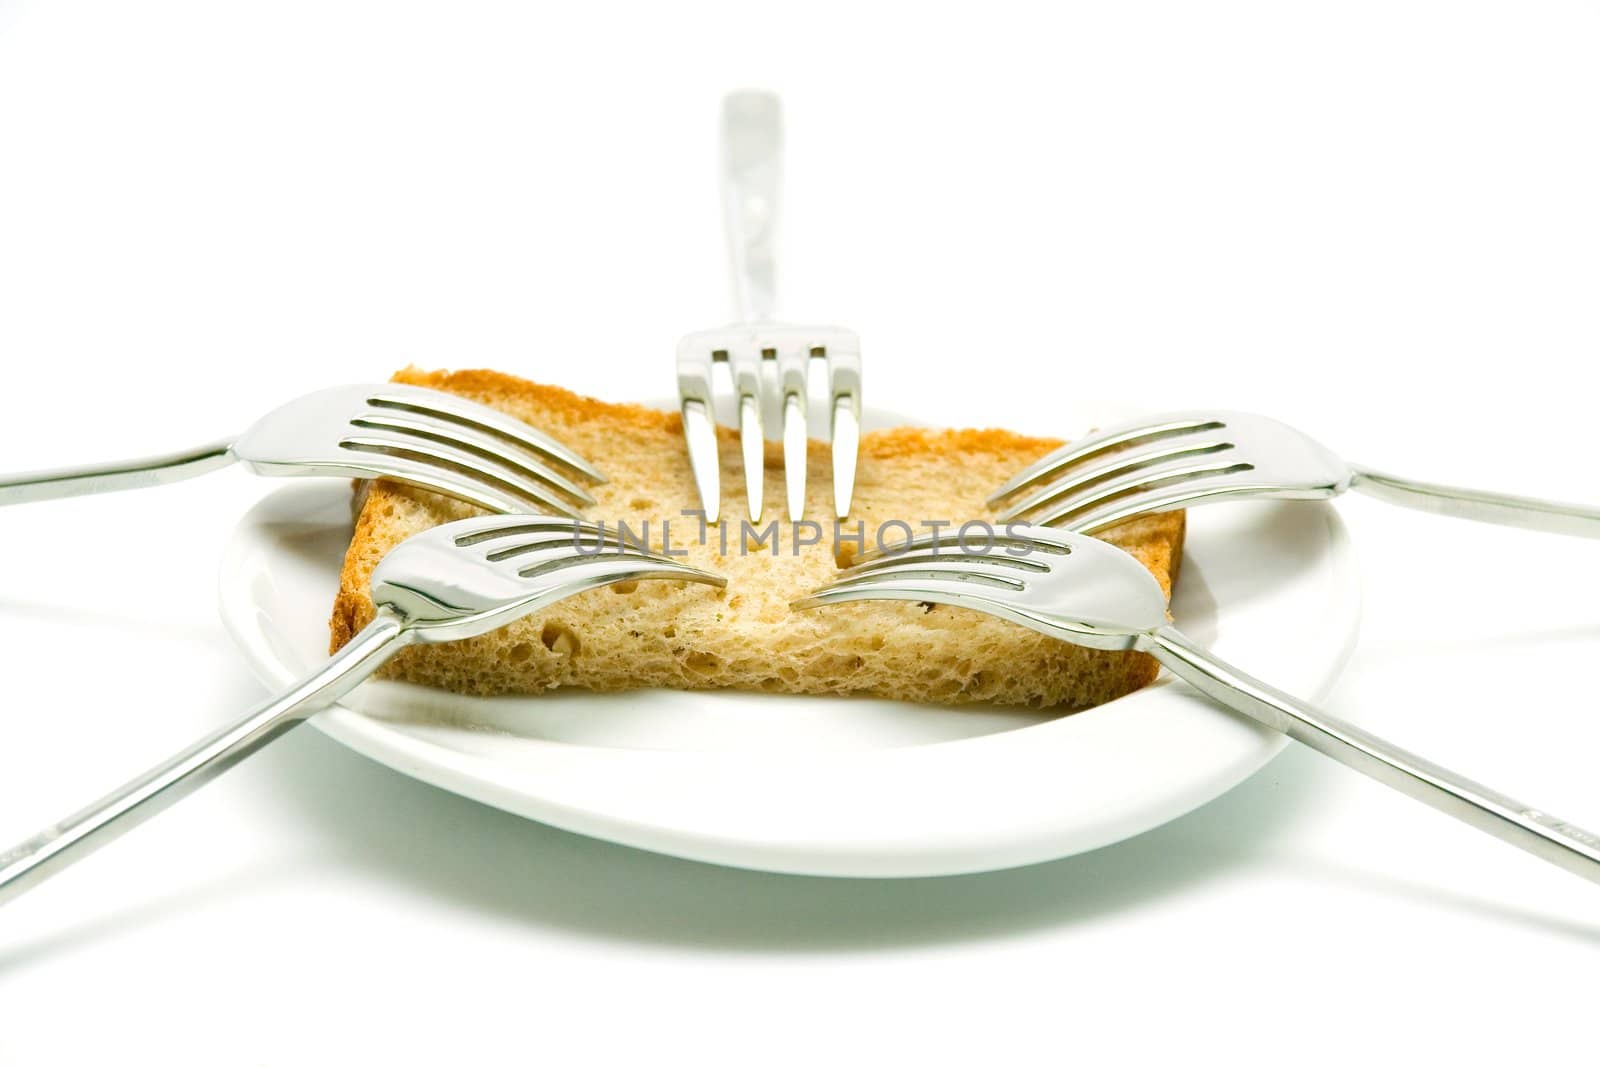 Some forks, white plateau and bread slice on a white background. 
The concept of limitation of resources. The concept  sharing between consumers.
